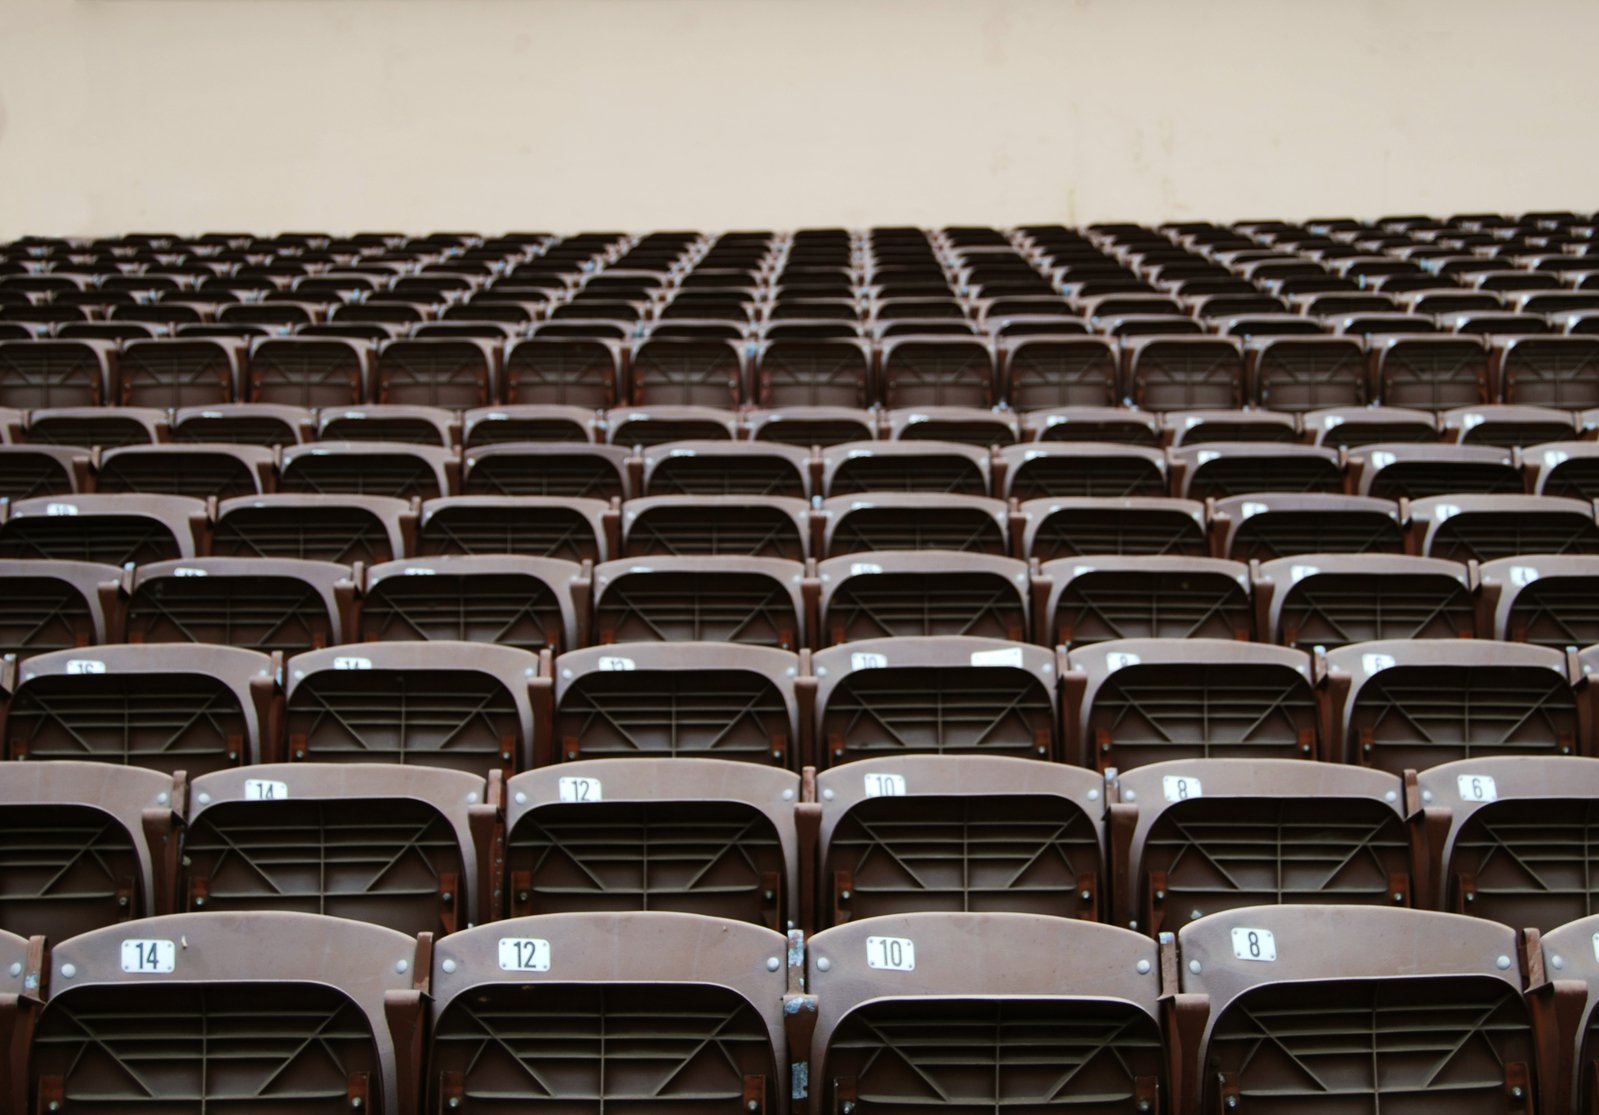 rows of brown seats are lined up on the floor